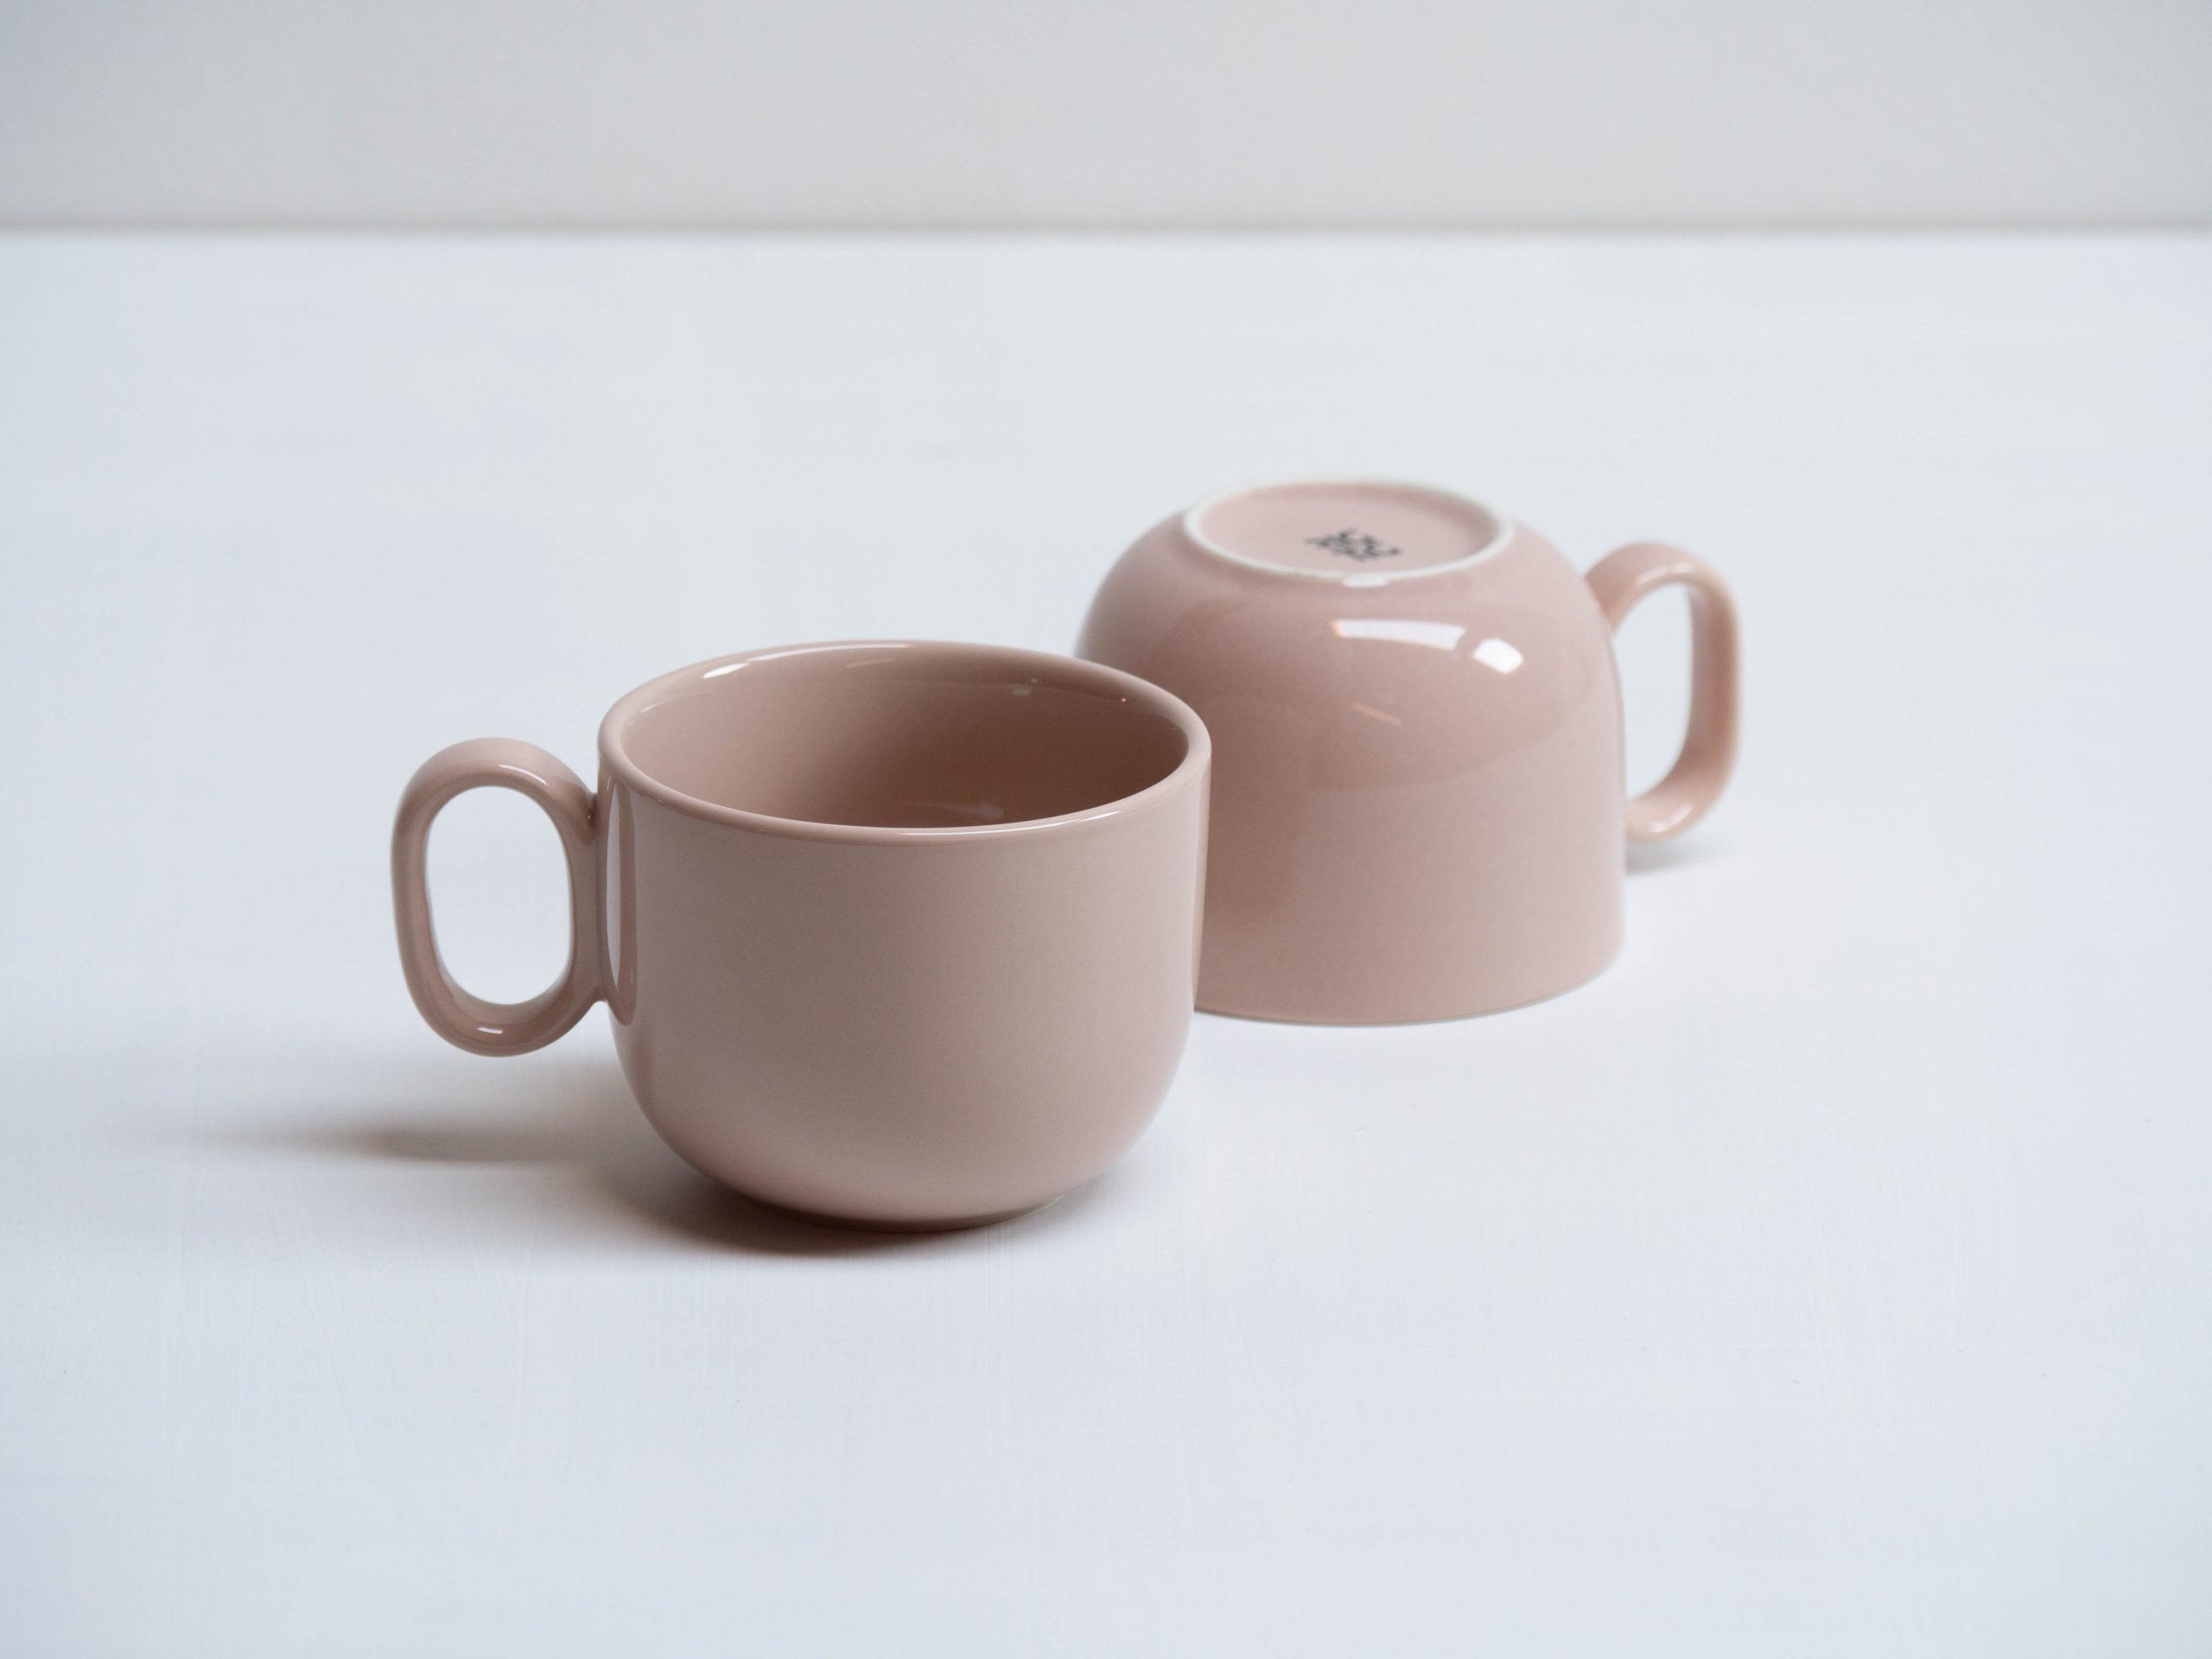 Blush cup of Colourful Mix N Match cups by Debiasi Sandri for RigTig